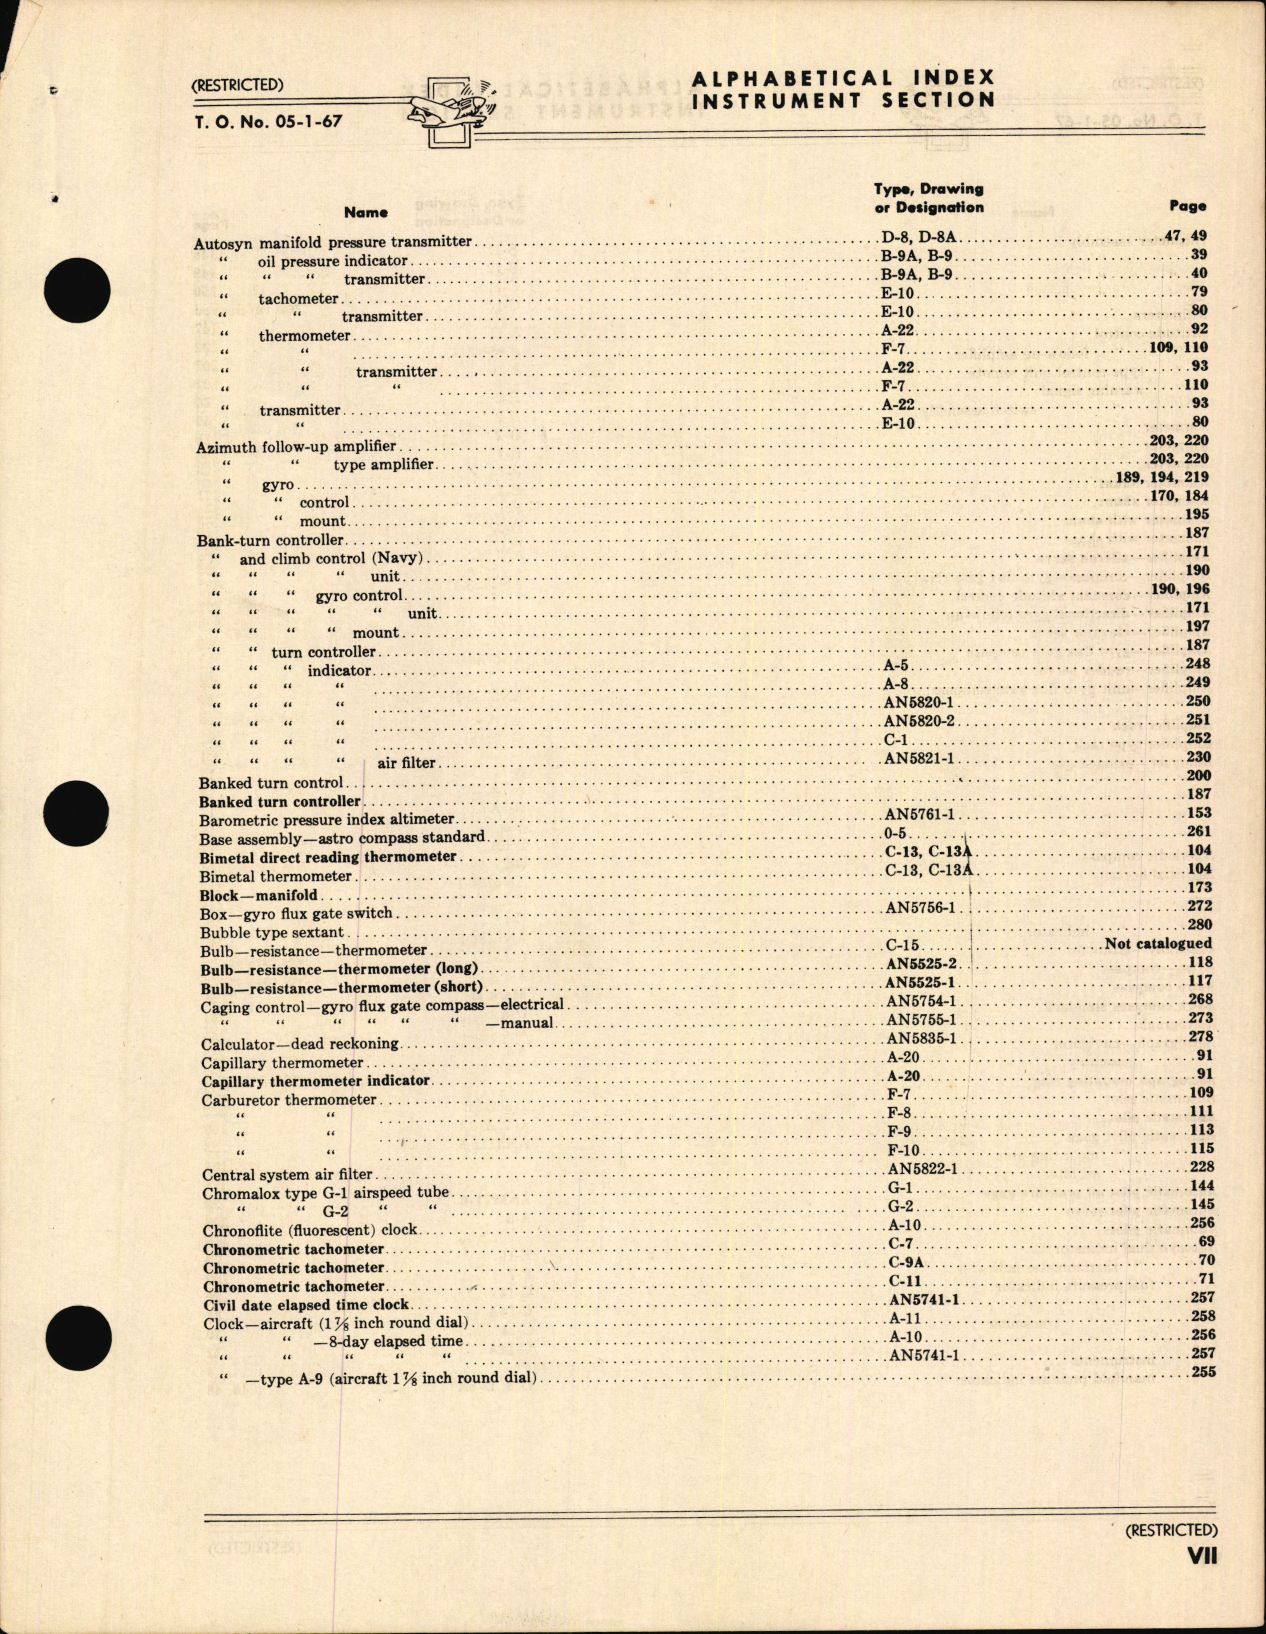 Sample page 7 from AirCorps Library document: Index of Army-Navy Aeronautical Equipment - Instruments